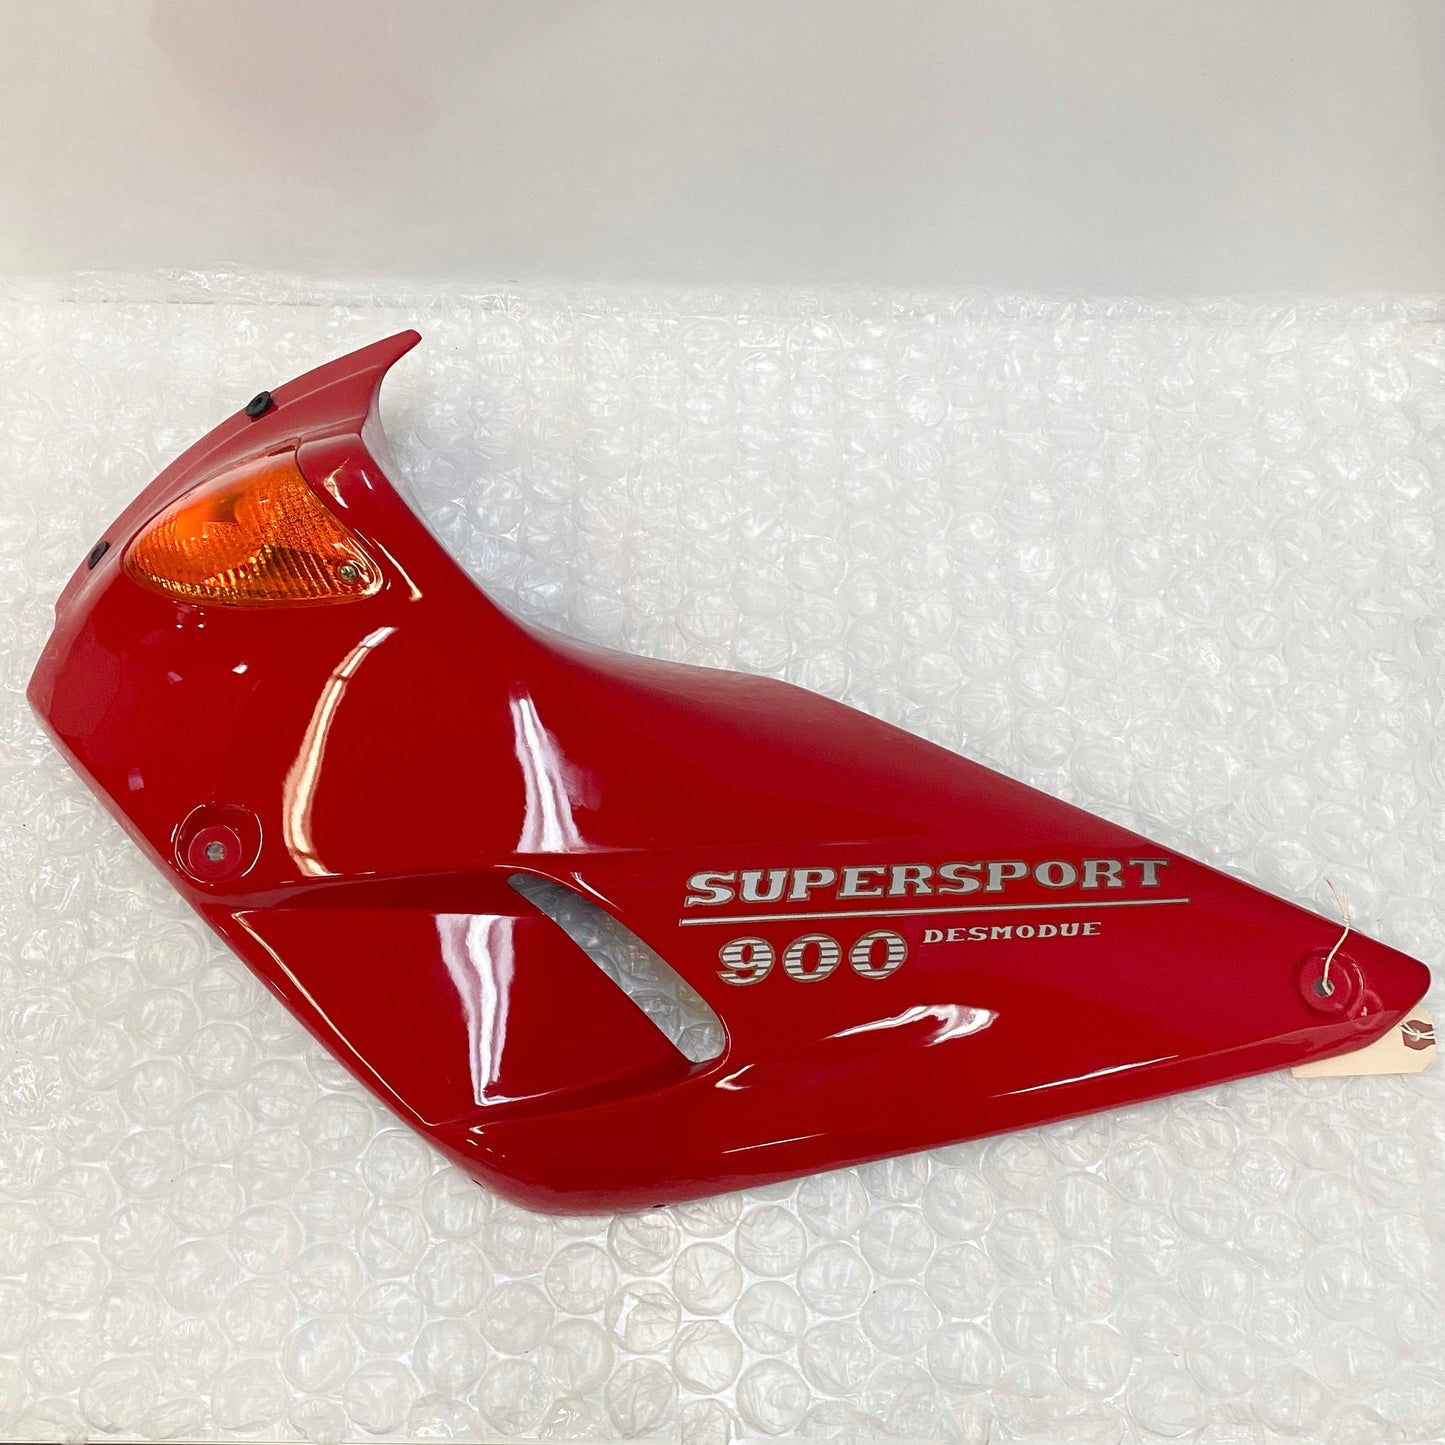 Ducati Supersport 900ss L/H Half Fairing, Red - 48010671AA Used